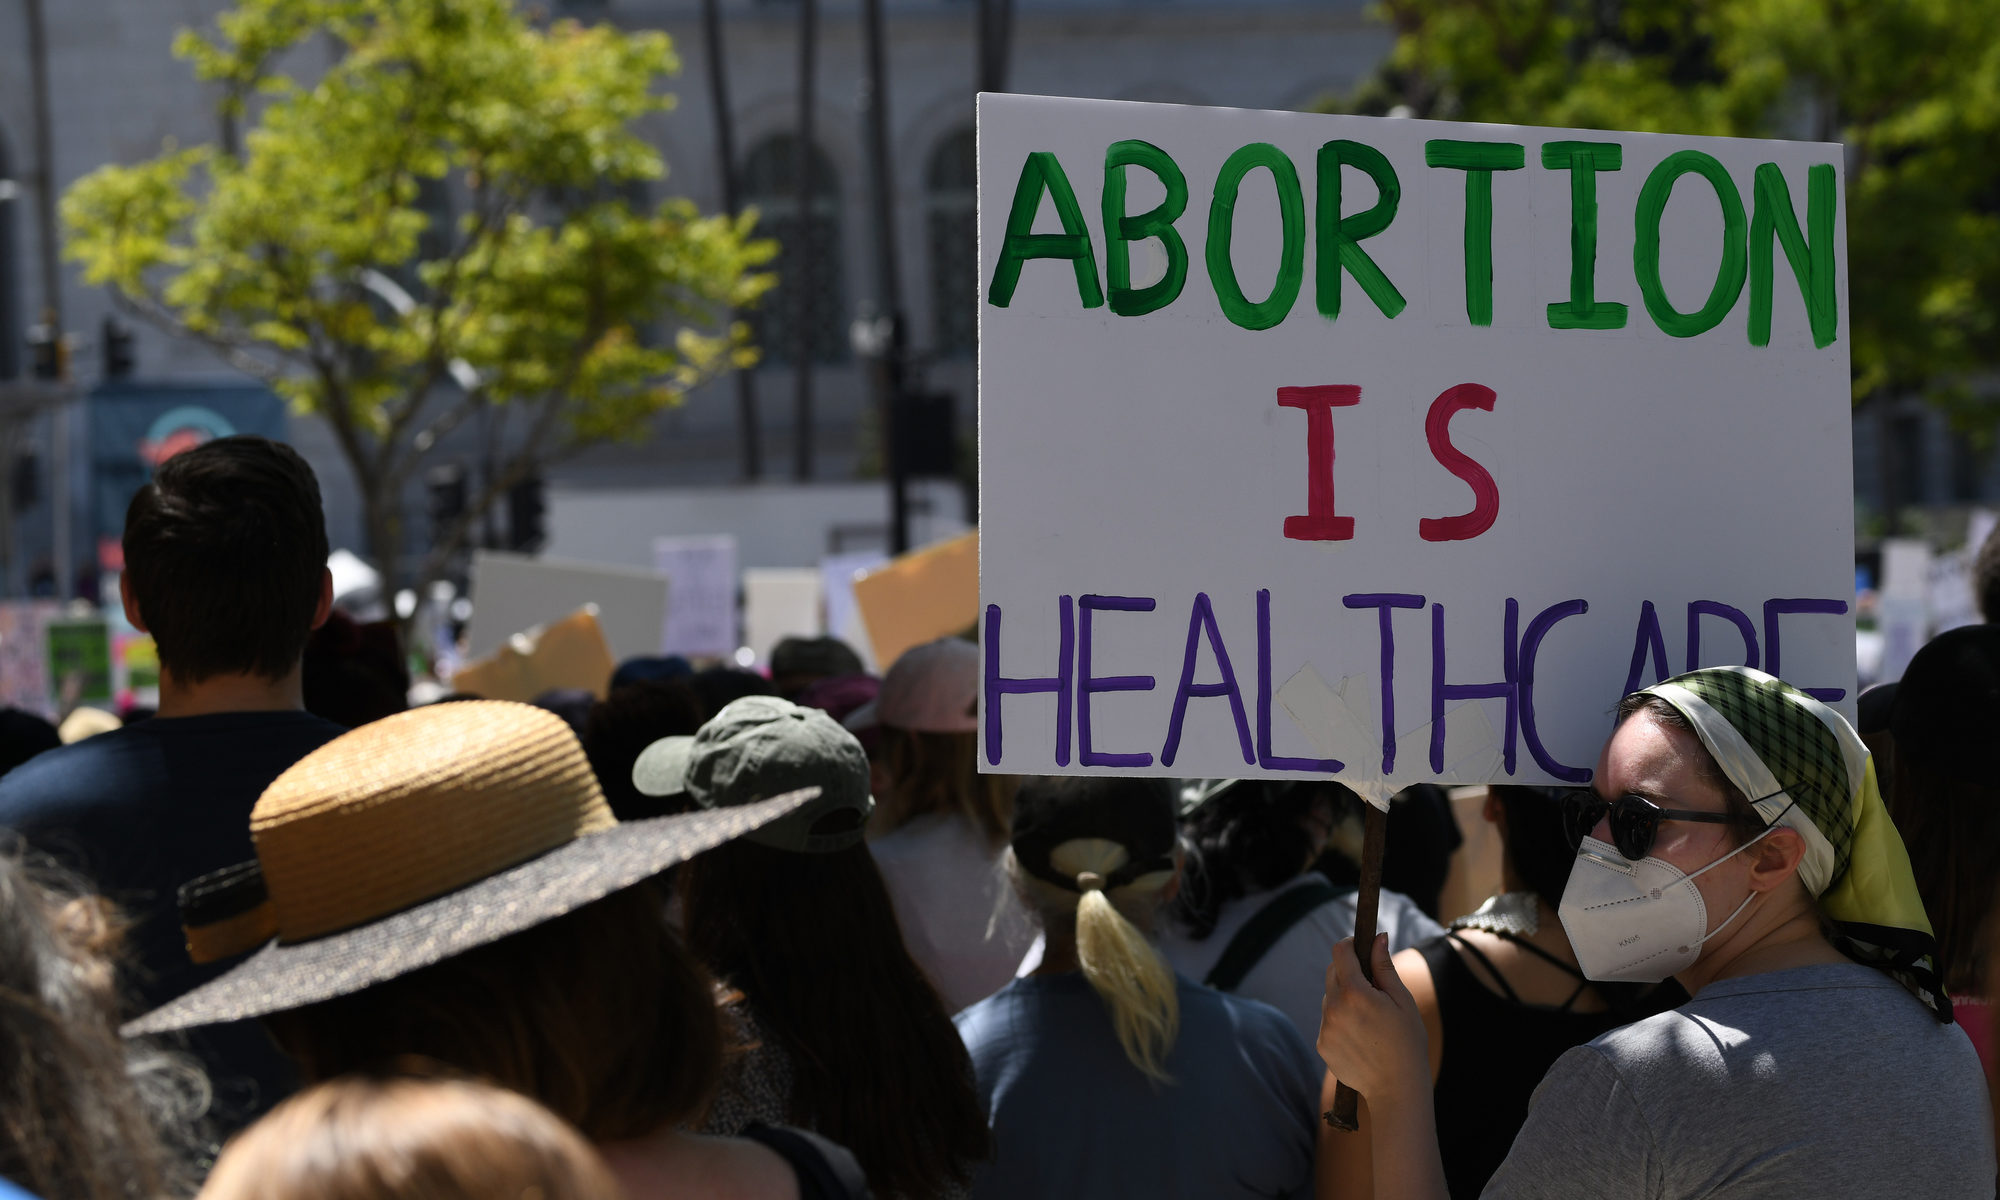 photograph of "Abortion Is Healthcare" protest sign